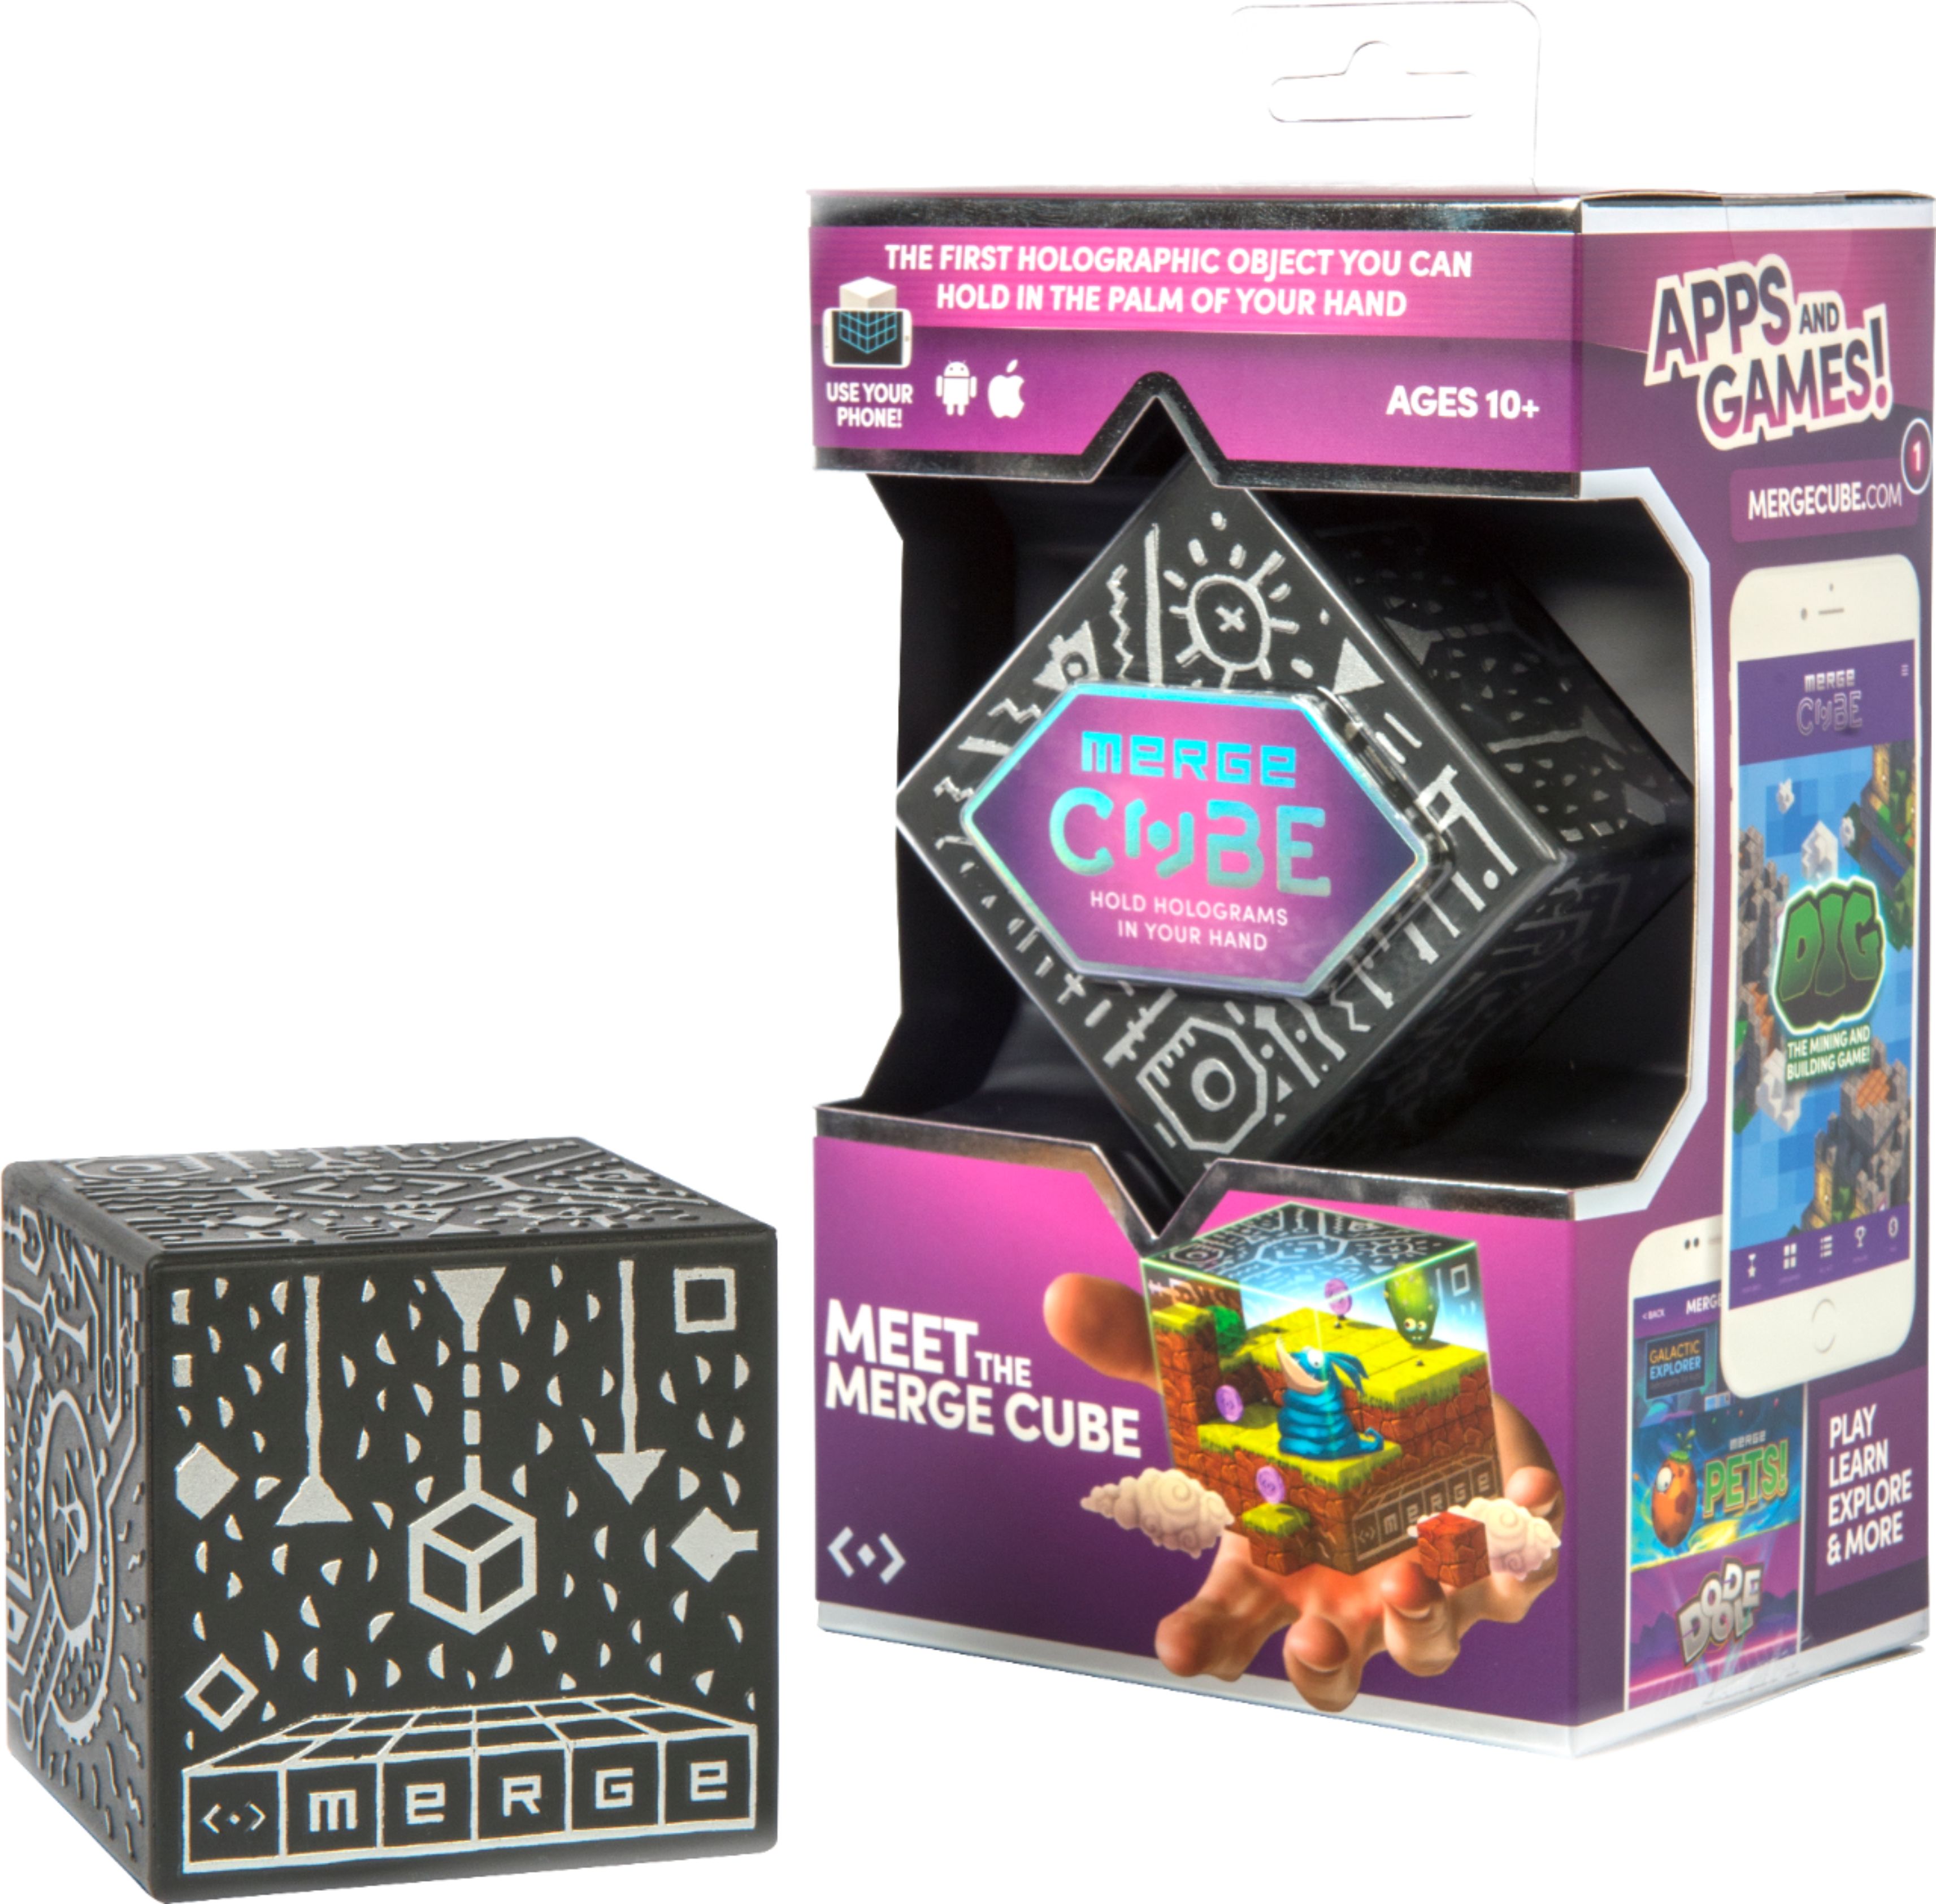 Dig! for MERGE Cube by Merge Apps